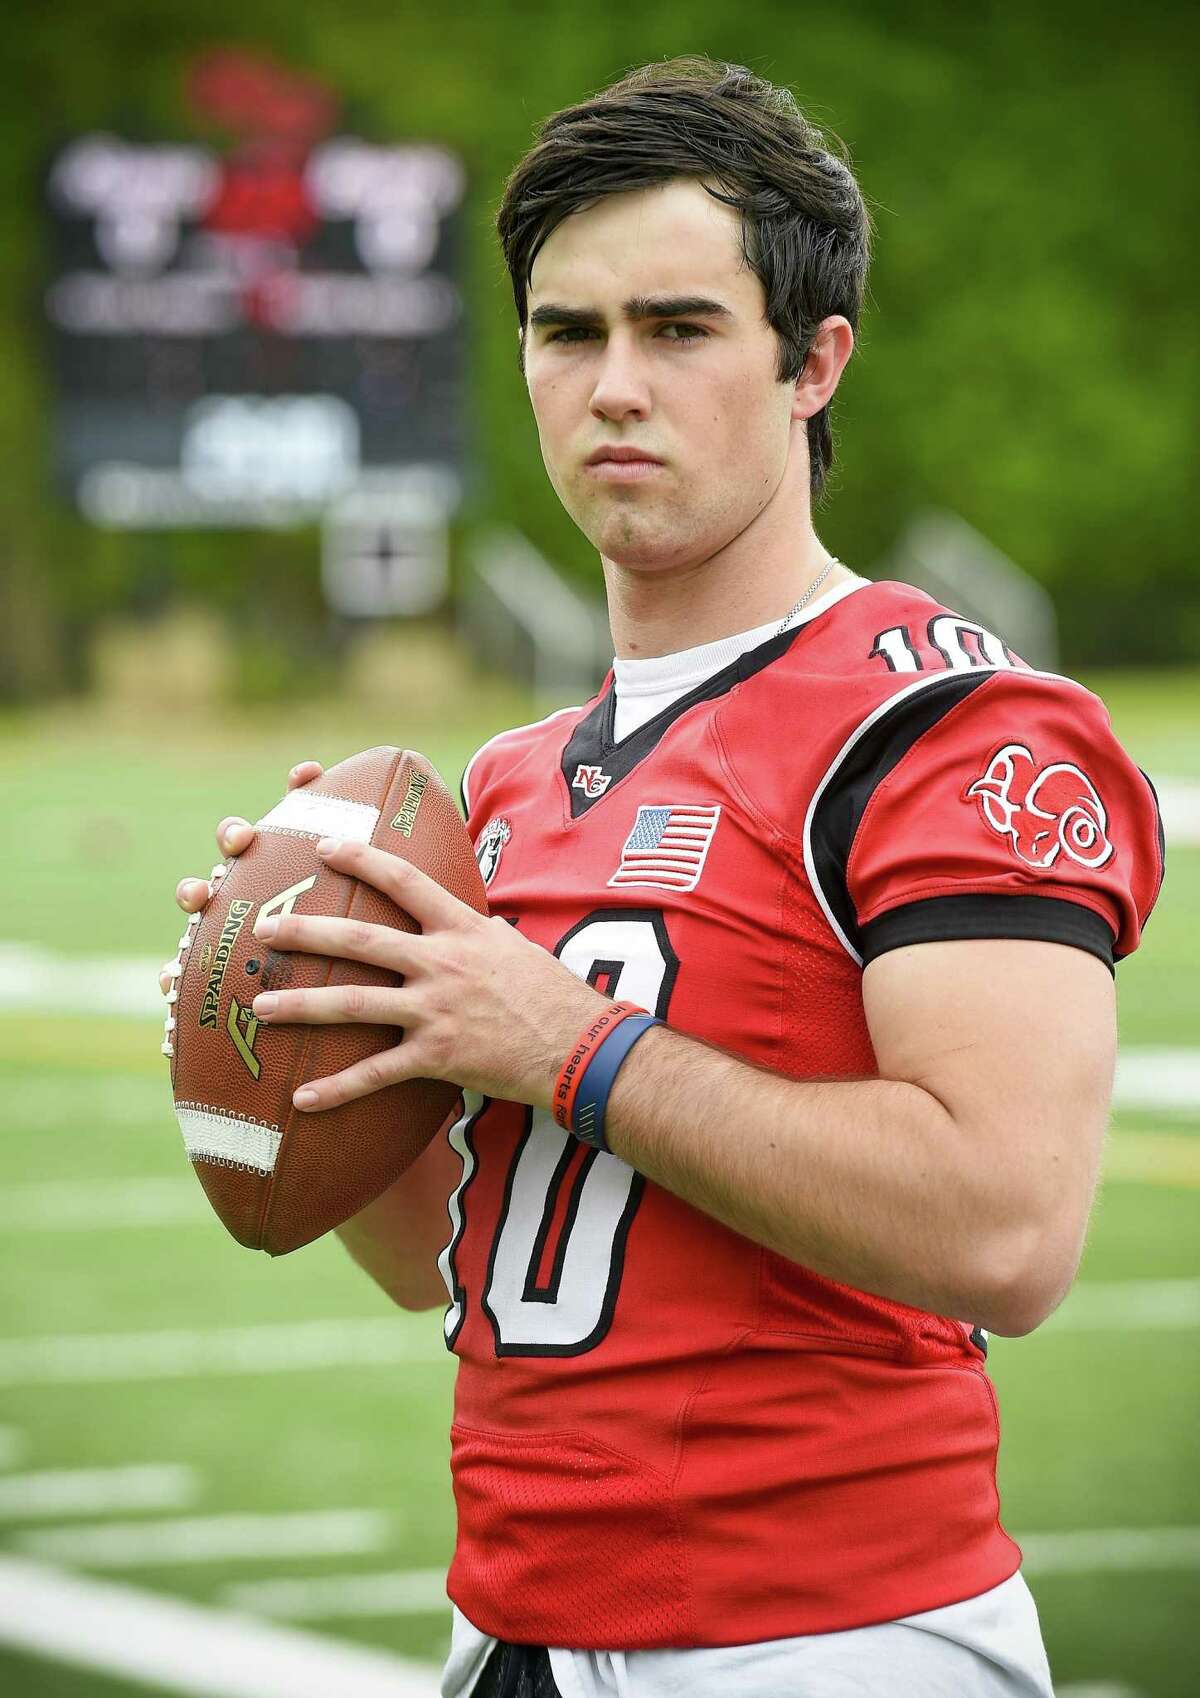 New Canaan QB Drew Pyne is photograph on May 9, 2019 at New Canaan High School's Dunning Field in New Canaan, Connecticut. The Junior has committed to play football at Notre Dame and is already New Canaan’s all-time leading passer. He is one of the most widely-discussed and dissected quarterbacks in the history of Connecticut high school football.